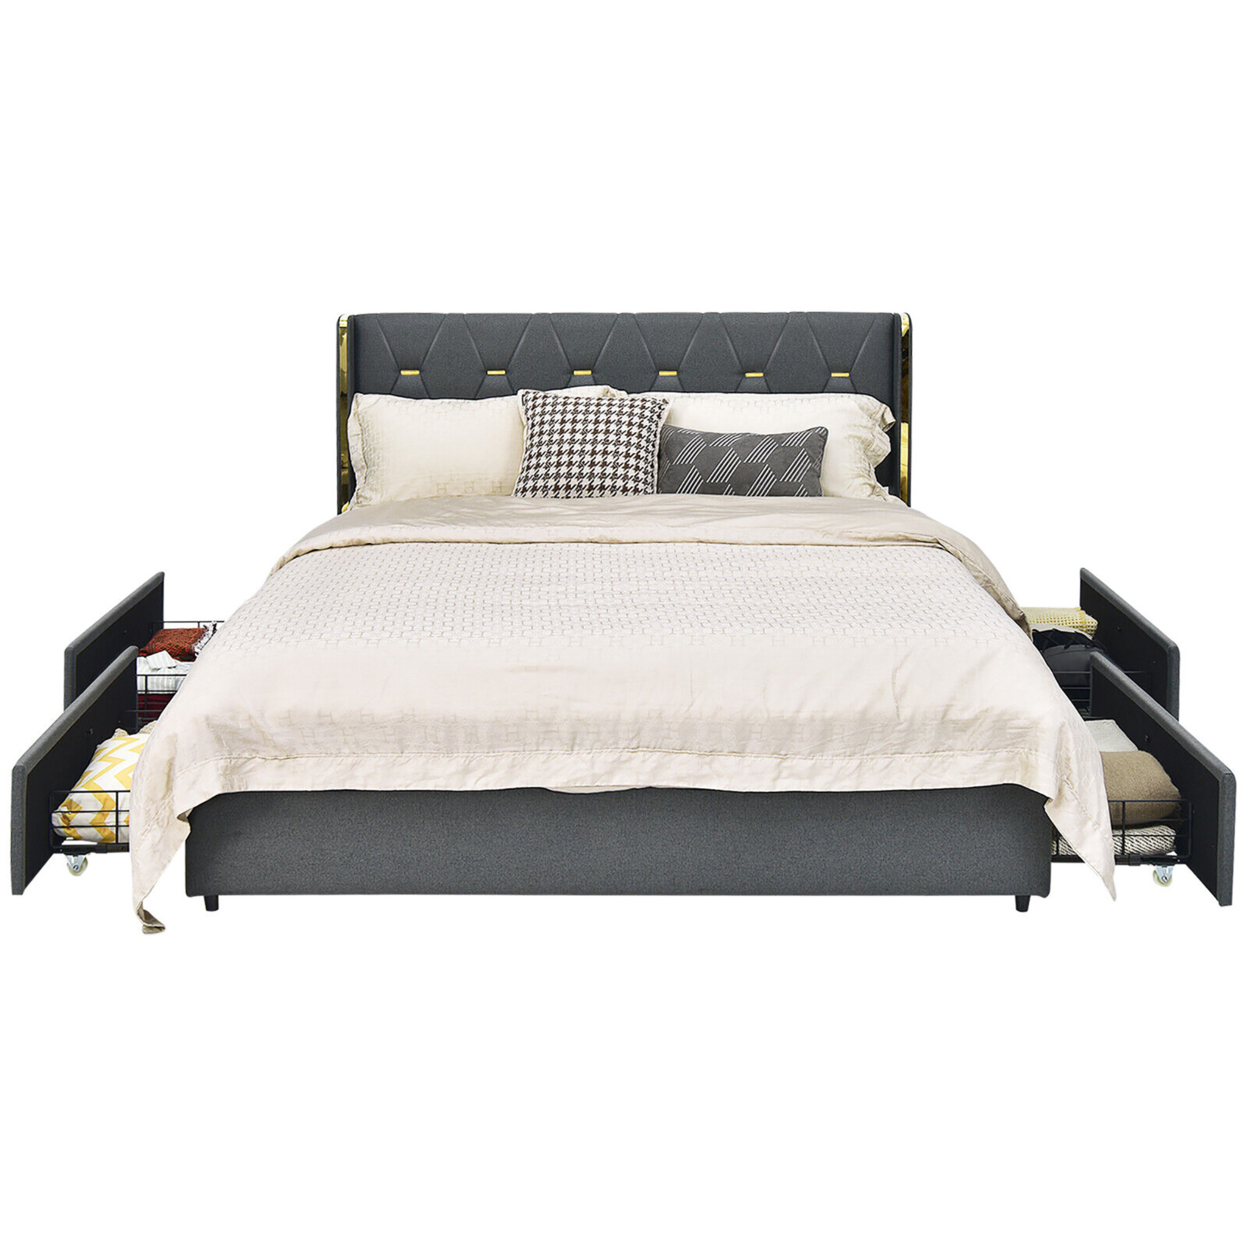 Gymax Queen Upholstered Bed Frame W/ 4 Rolling Drawers & High Headboard & Legs Dark